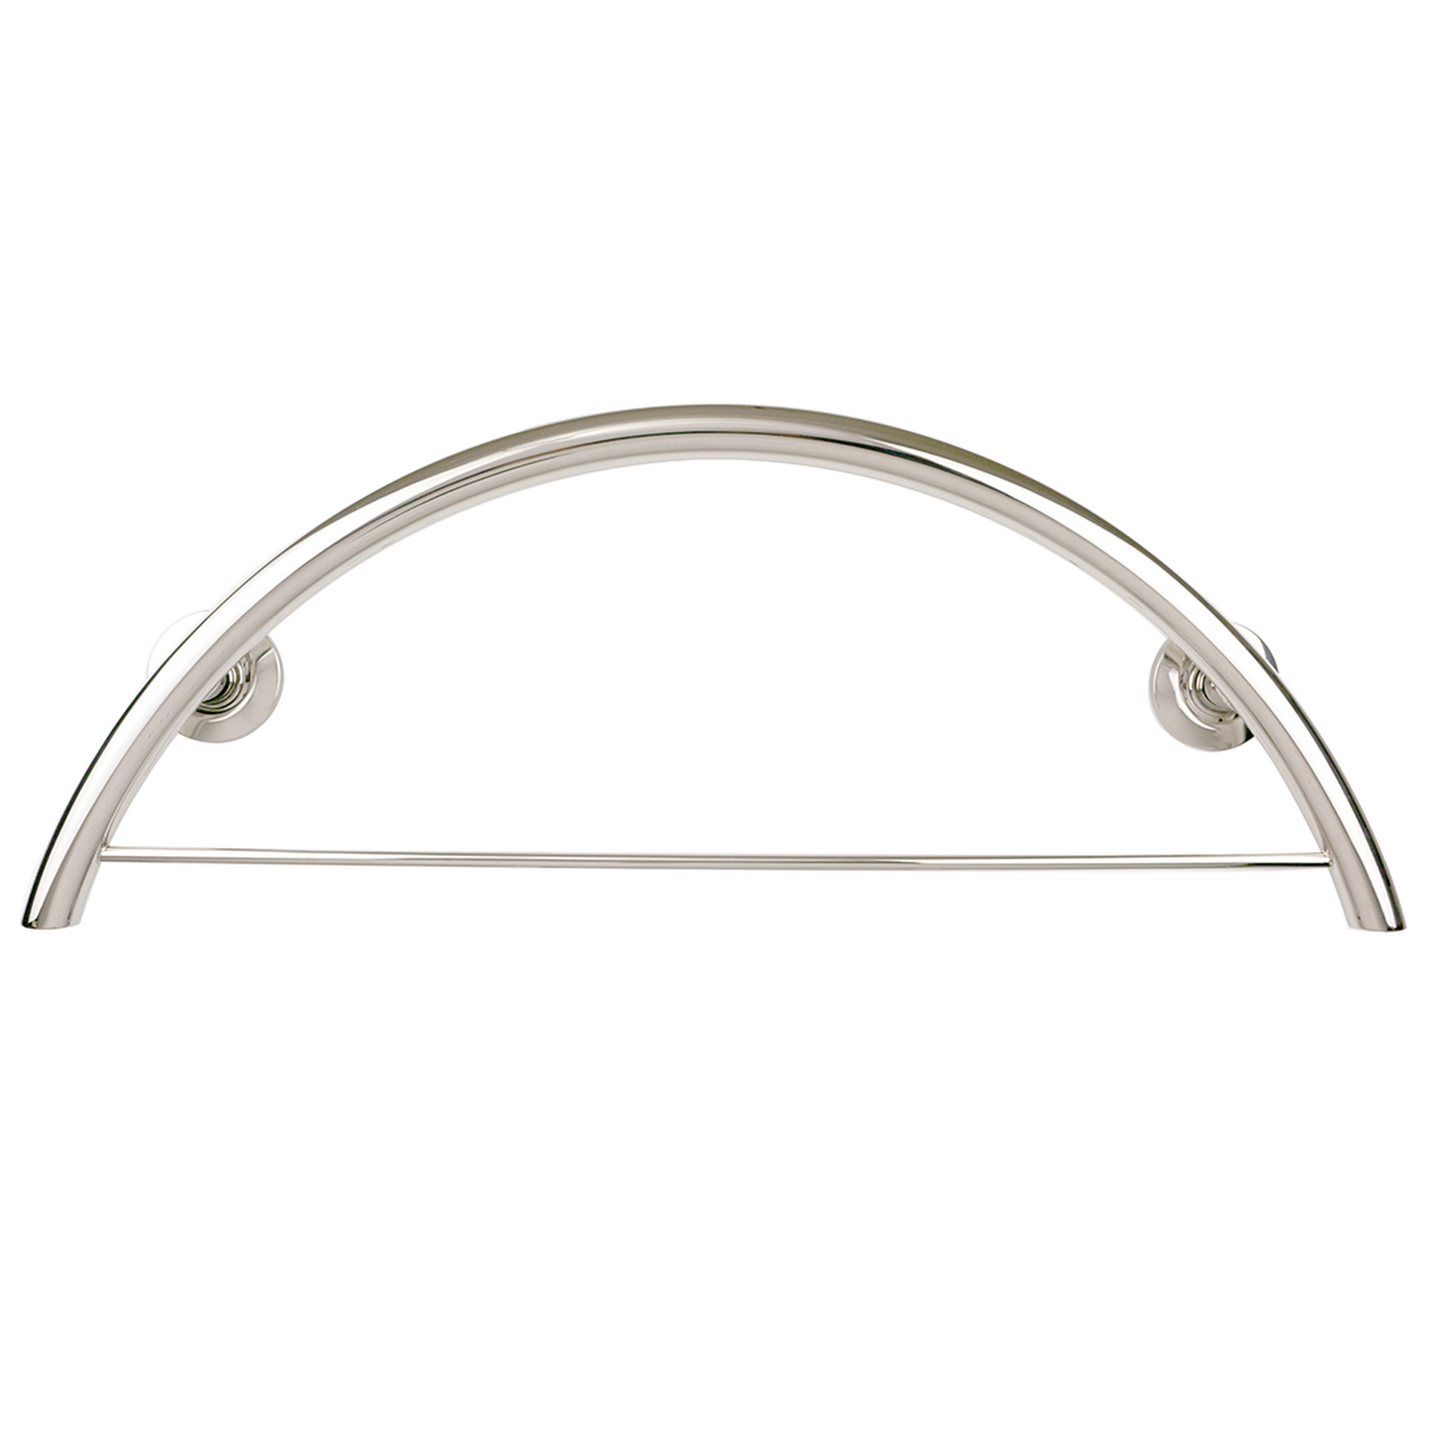 Seachrome Lifestyle & Wellness 30" Polished Stainless Steel 1.25 Diameter Concealed Flange Half Moon Bay Curved Grab Bar with Towel Bar